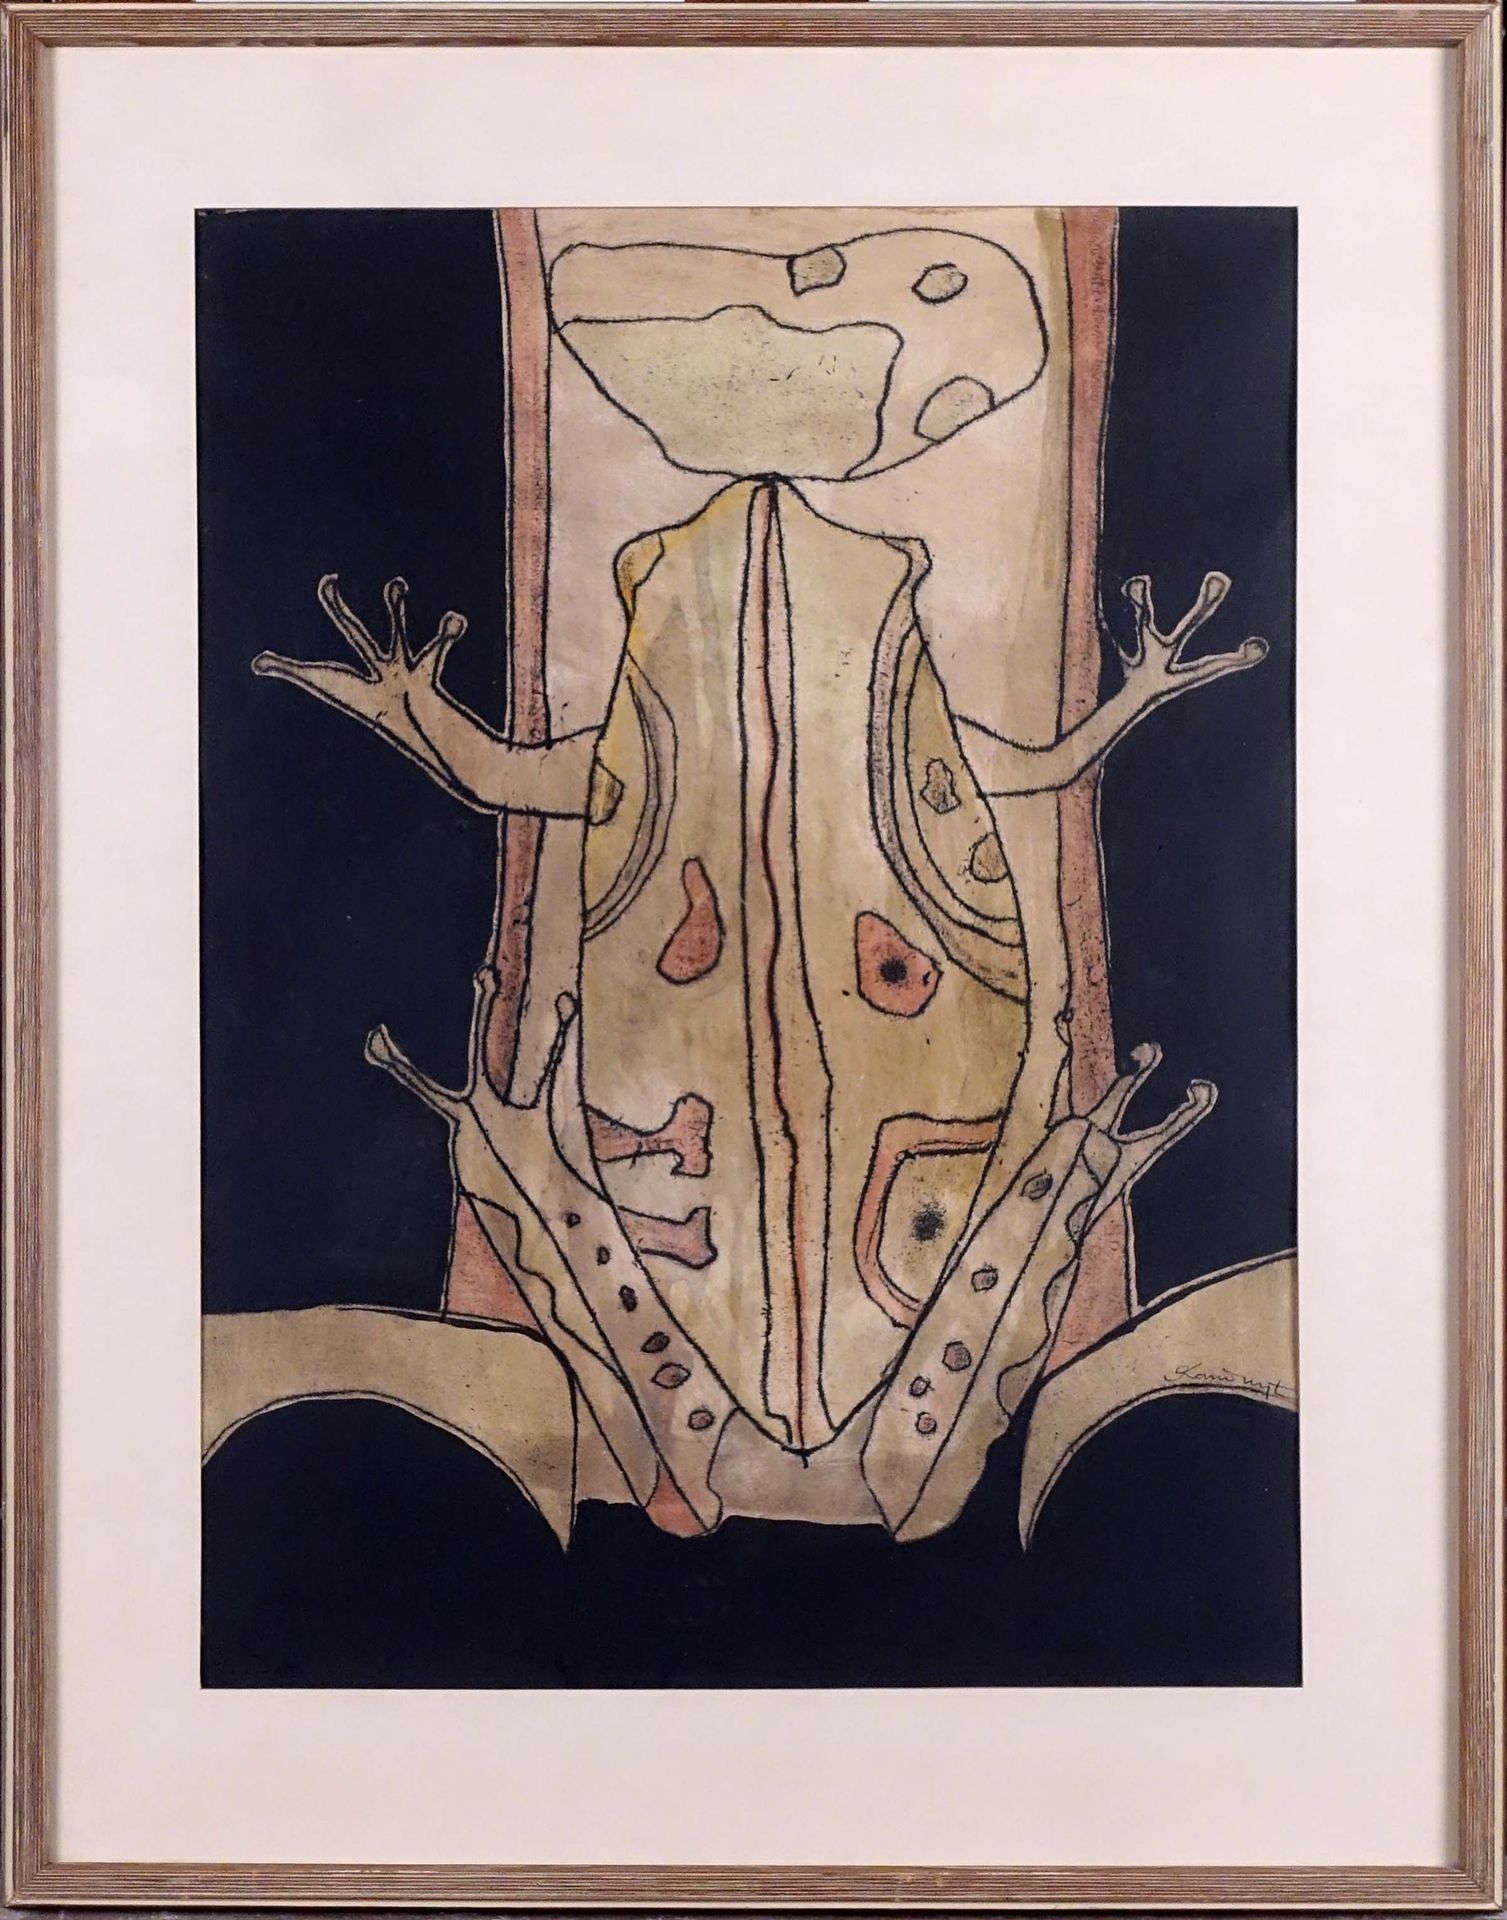 Octave Landuyt (1922). The Frog. Mixed media signed on the lower right. Dimensio&hellip;